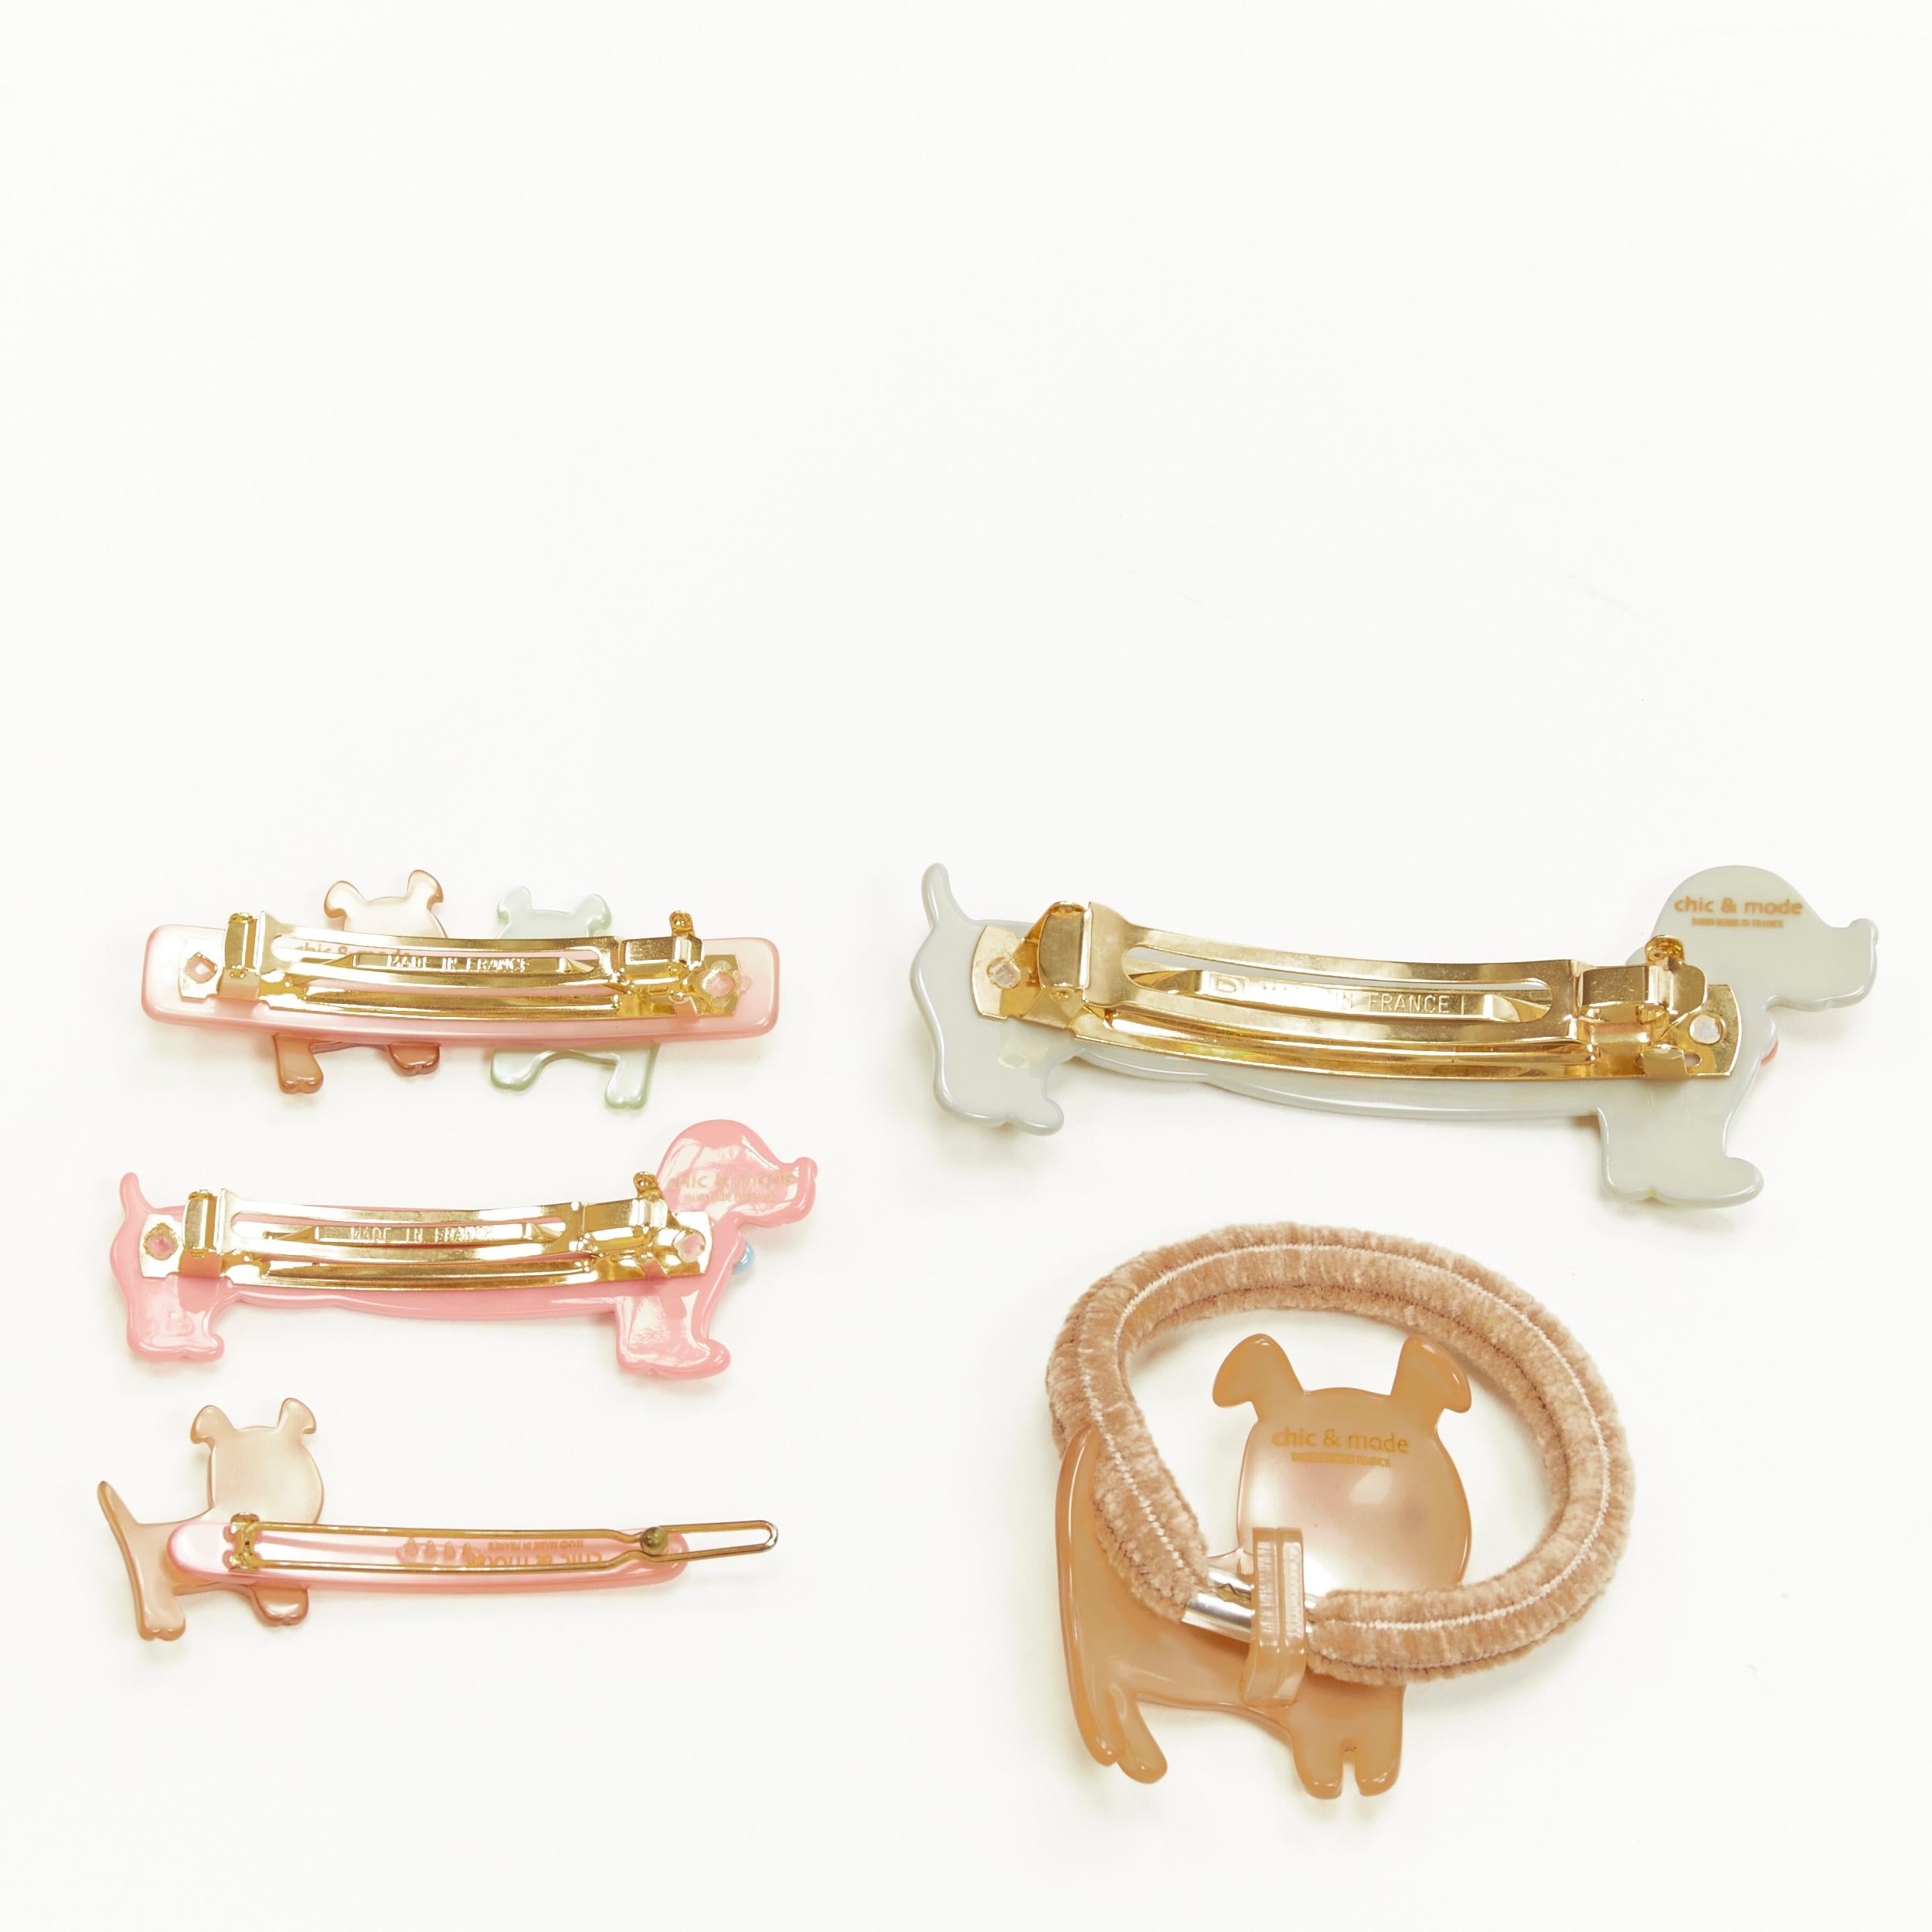 CHIC & MODE Alexandre Zouari LOT OF 5 dogs crystal acrylic hair clip tie 
Reference: ANWU/A00255 
Brand: Chic and Mode 
Designer: Alexandre Zouari 
Material: Plastic 
Color: Multicolour 
Pattern: Solid 
Closure: Clip 
Extra Detail: Large dog clip